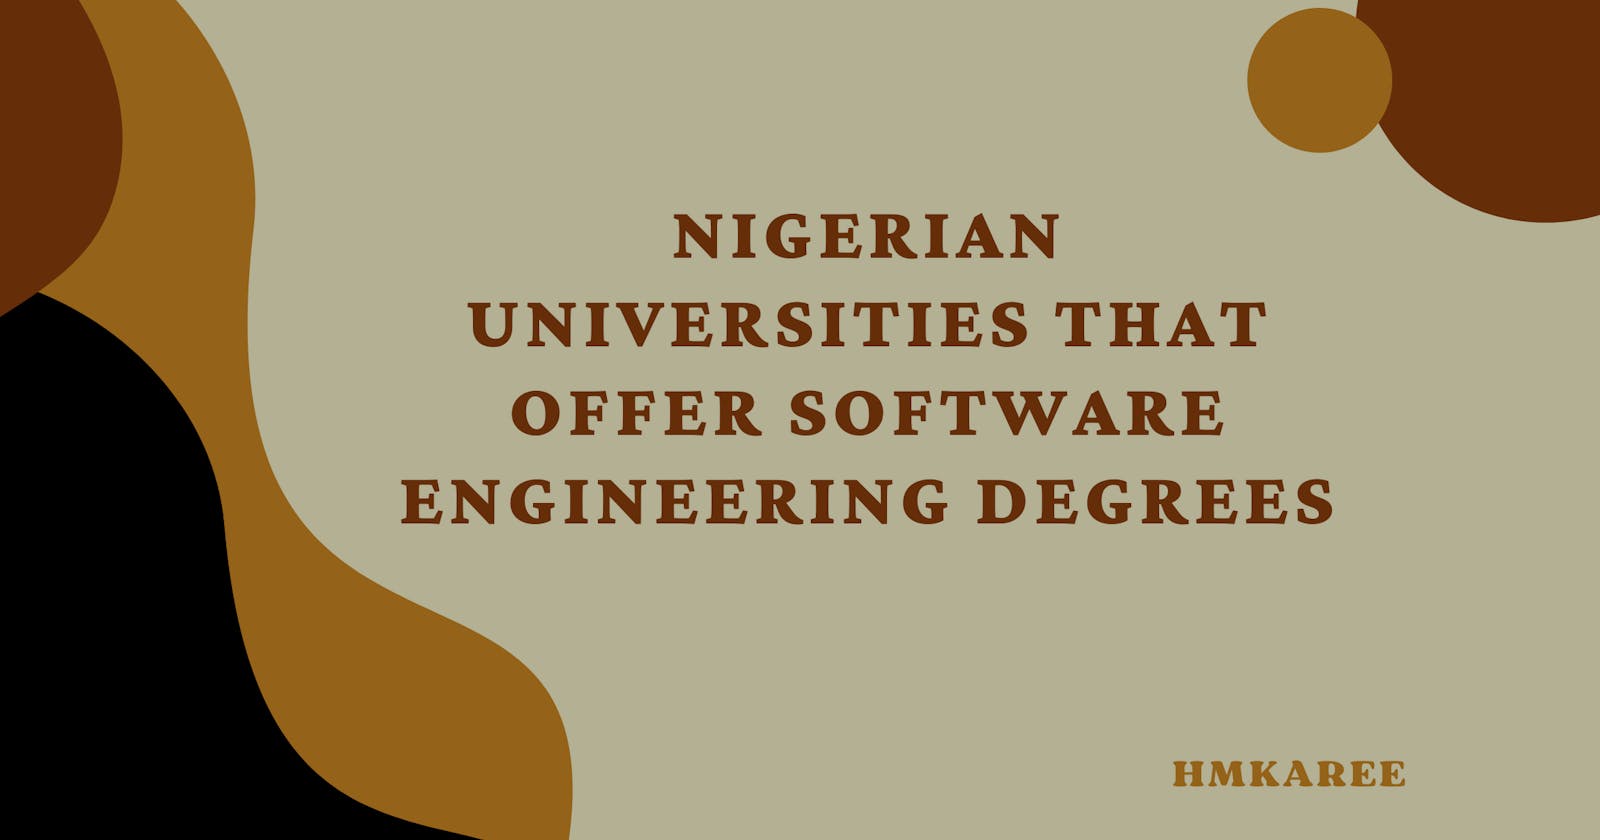 Nigerian Universities that offer software engineering degrees